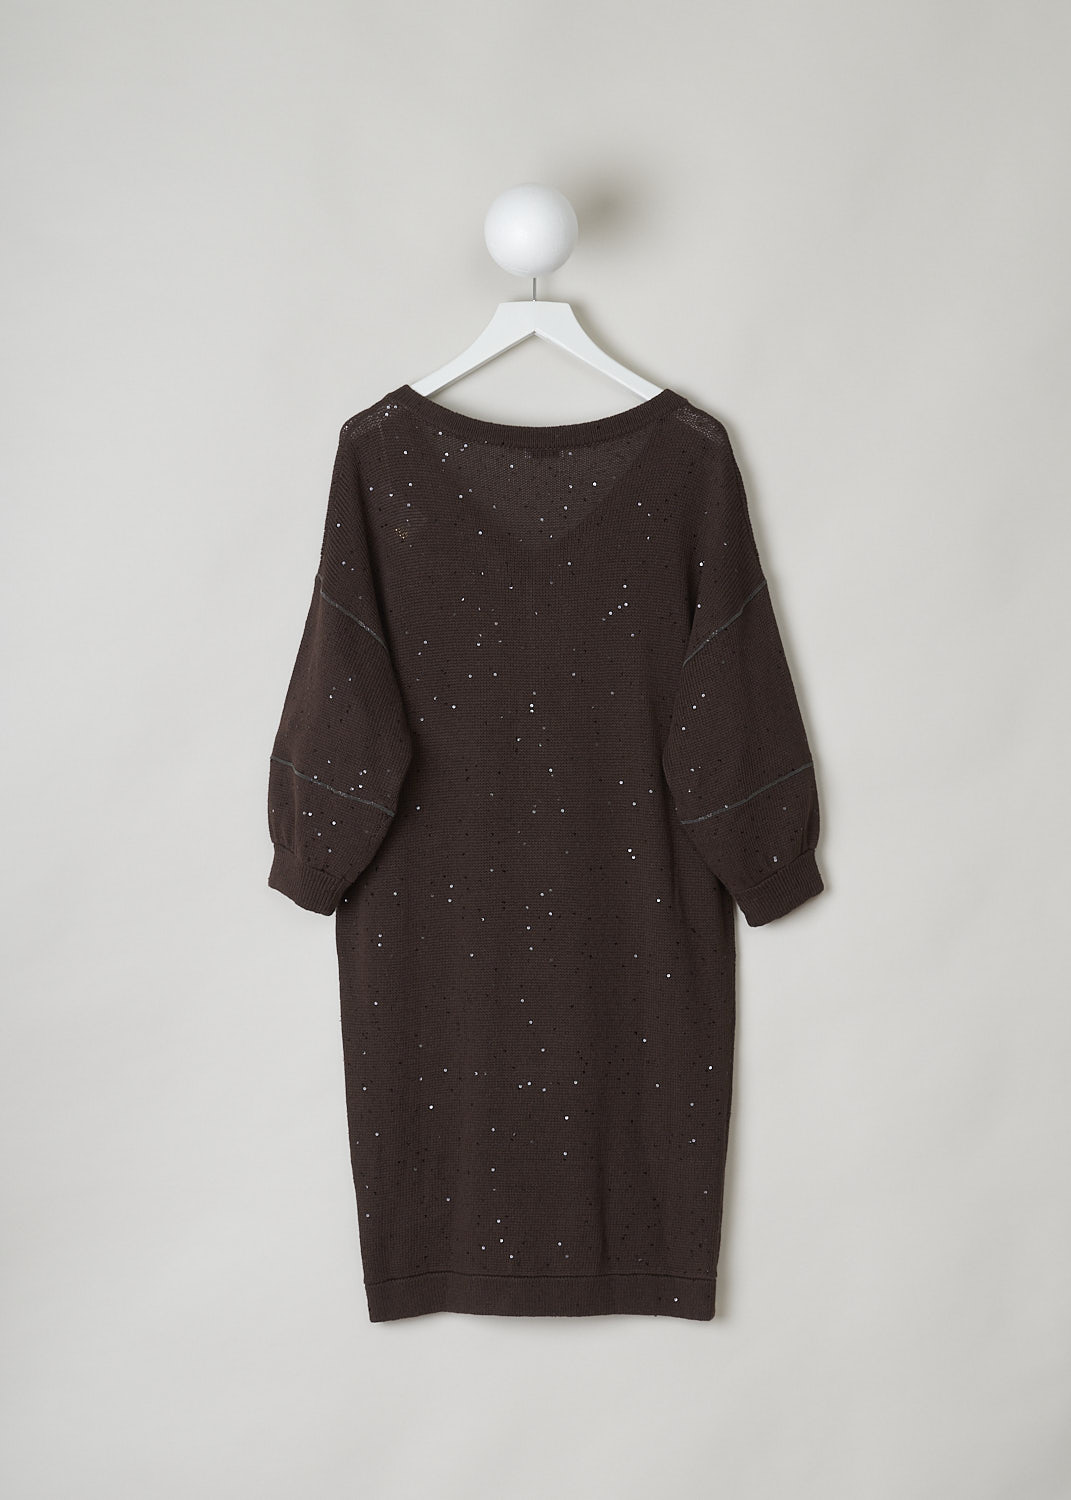 BRUNELLO CUCINELLI, WARM BROWN SWEATER DRESS WITH SEQUINS, Brown, Back, This warm brown knitted sweater dress has a V-neckline, dropped shoulders and three-quarter sleeves. The neckline, cuffs and hemline have a ribbed finish. The dress has sequins sewn in throughout and along the shoulders and across the sleeves, monili beaded strips can be found. The dress has a wider silhouette.  
